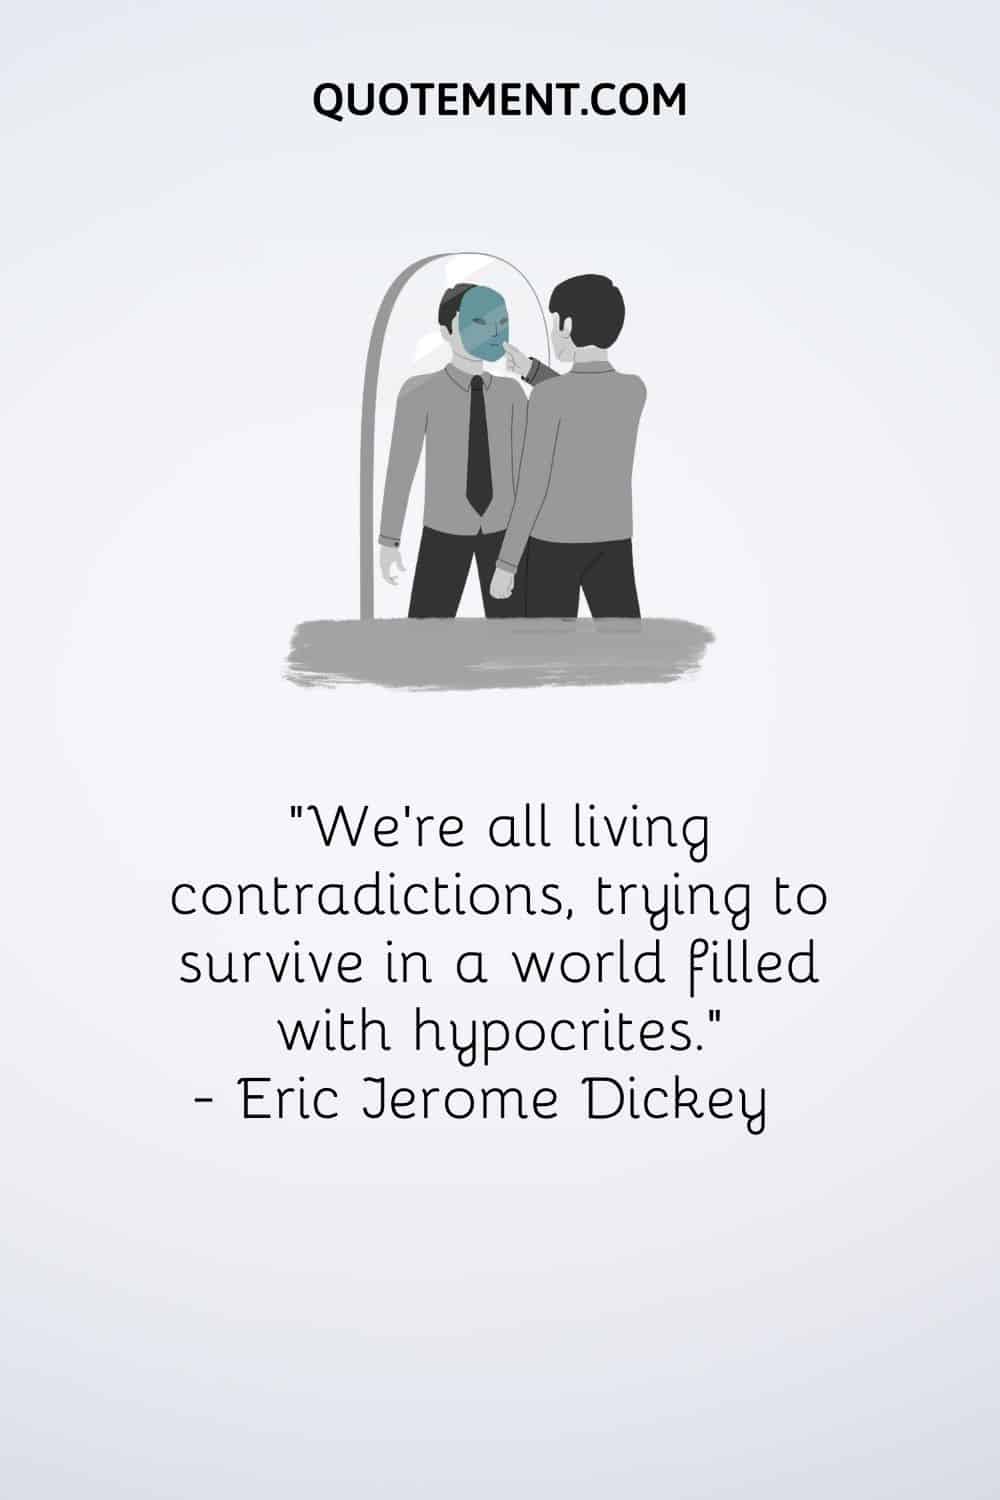 “We’re all living contradictions, trying to survive in a world filled with hypocrites.” — Eric Jerome Dickey